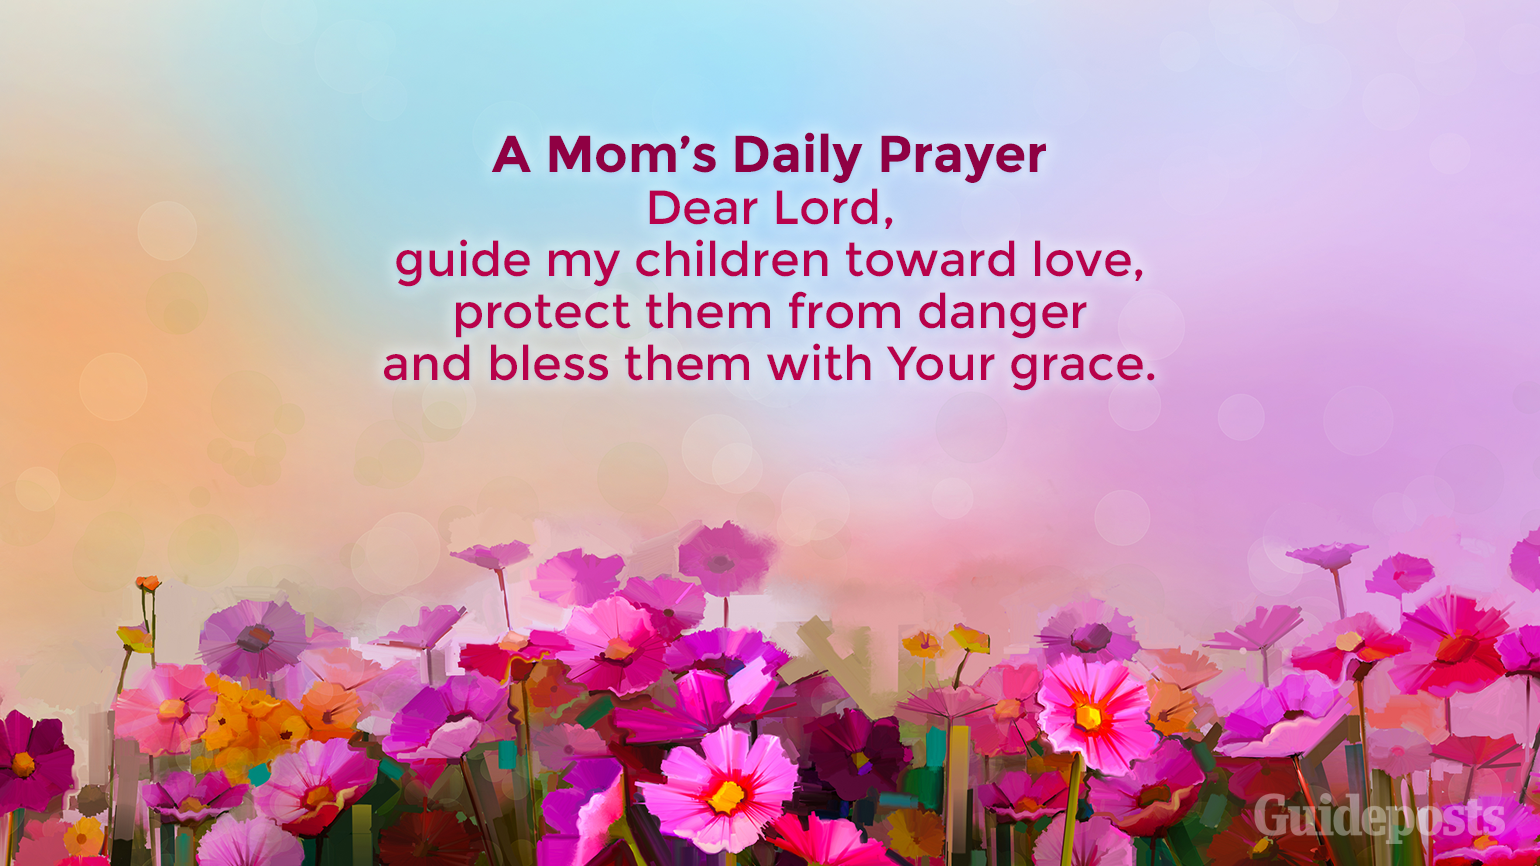 Celebrate motherhood with these 9 prayers and blessings.